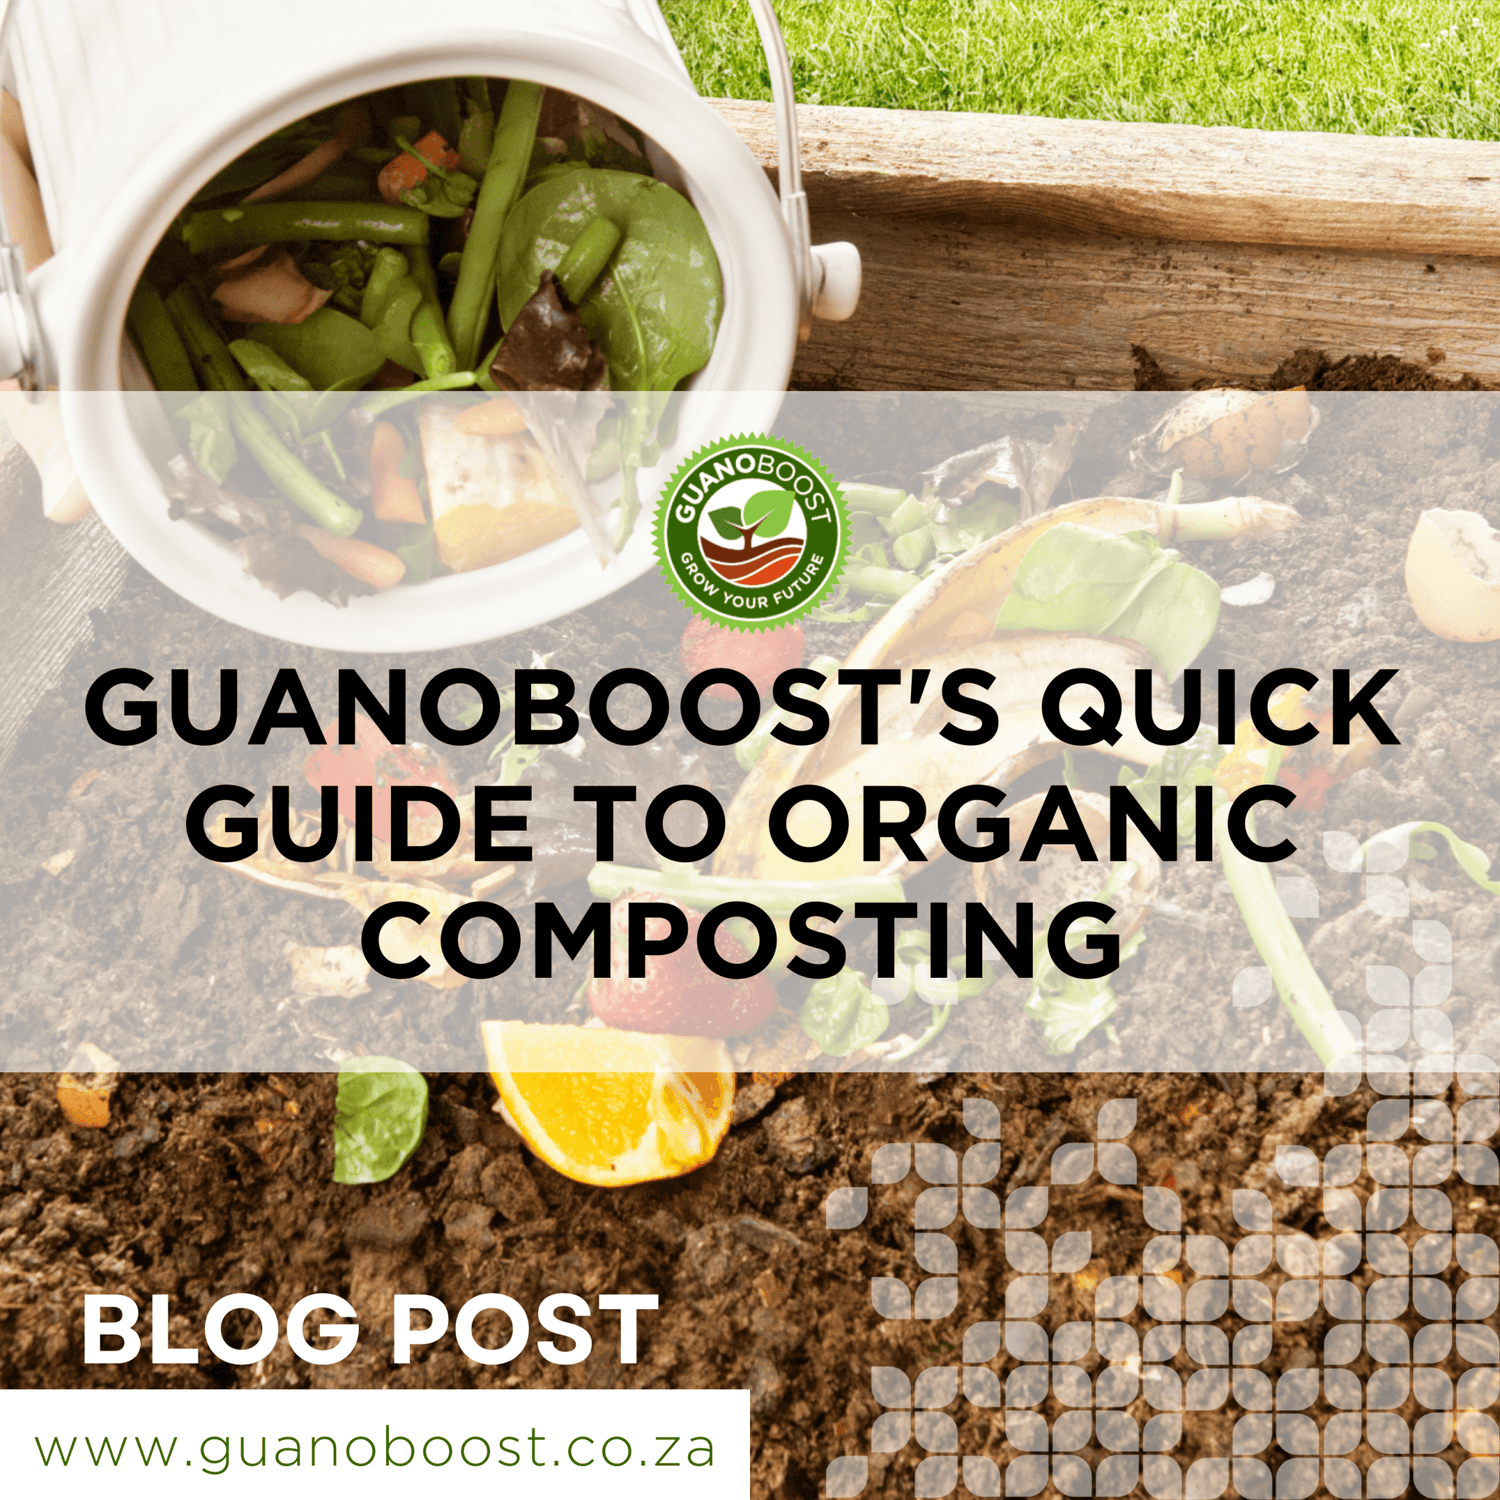 GuanoBoost's Quick Guide to Organic Composting - GuanoBoost